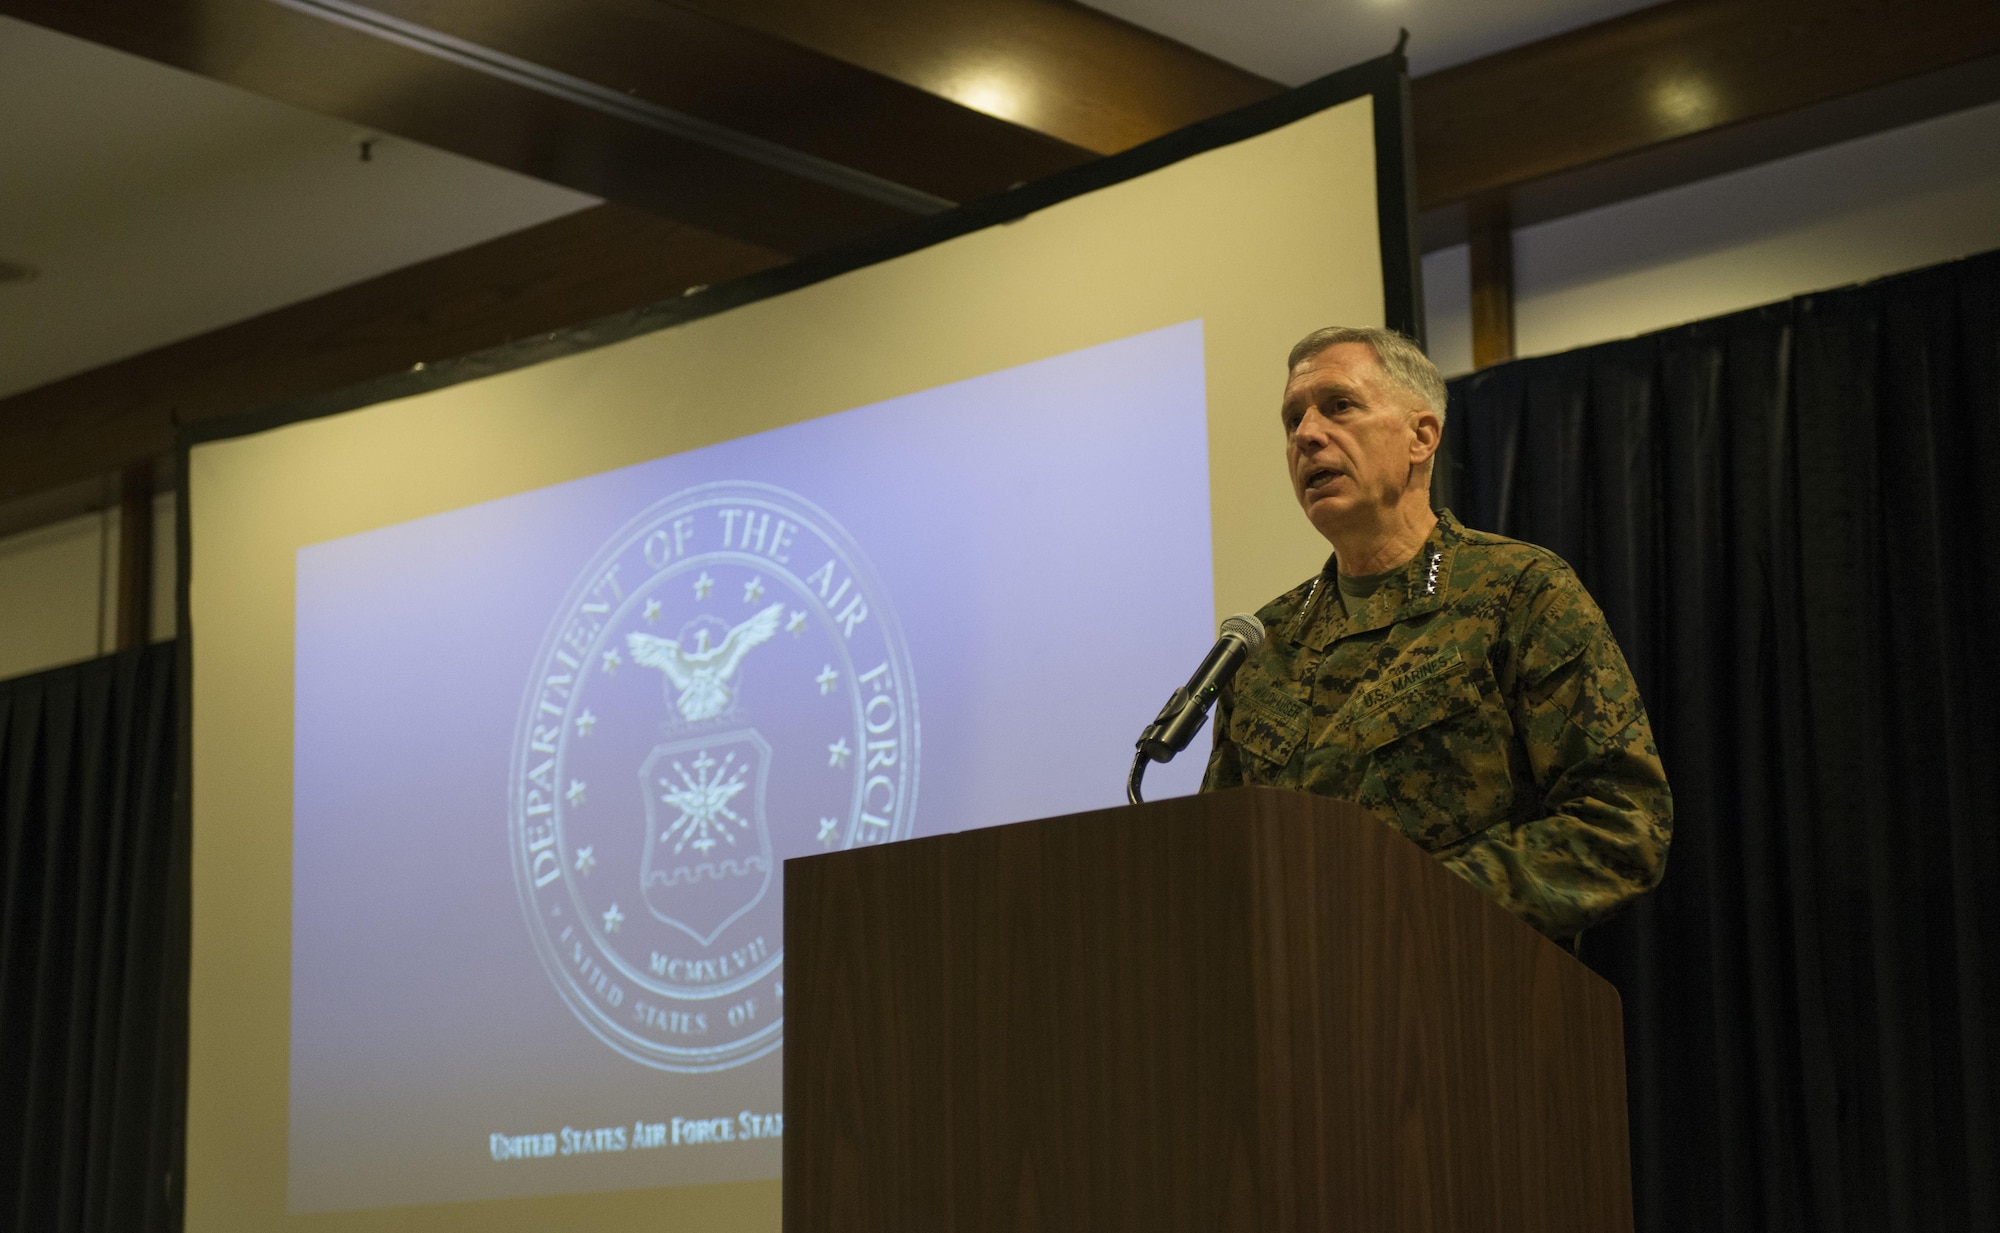 U.S. Marine Corps Gen. Thomas Waldhauser, commander, U.S. Africa Command, gives his opening statement at the annual Regional Synchronization Working Group symposium at Ramstein Air Base, Germany, Nov. 14, 2016. The event is an Africa-focused security cooperation forum with leaders from the Department of State, the Department of Defense, the U.S. Agency for International Development and other personnel to synchronize efforts across the diplomatic, defense and developmental sectors in AFRICOM. (U.S. Air Force photo by Senior Airman Tryphena Mayhugh)